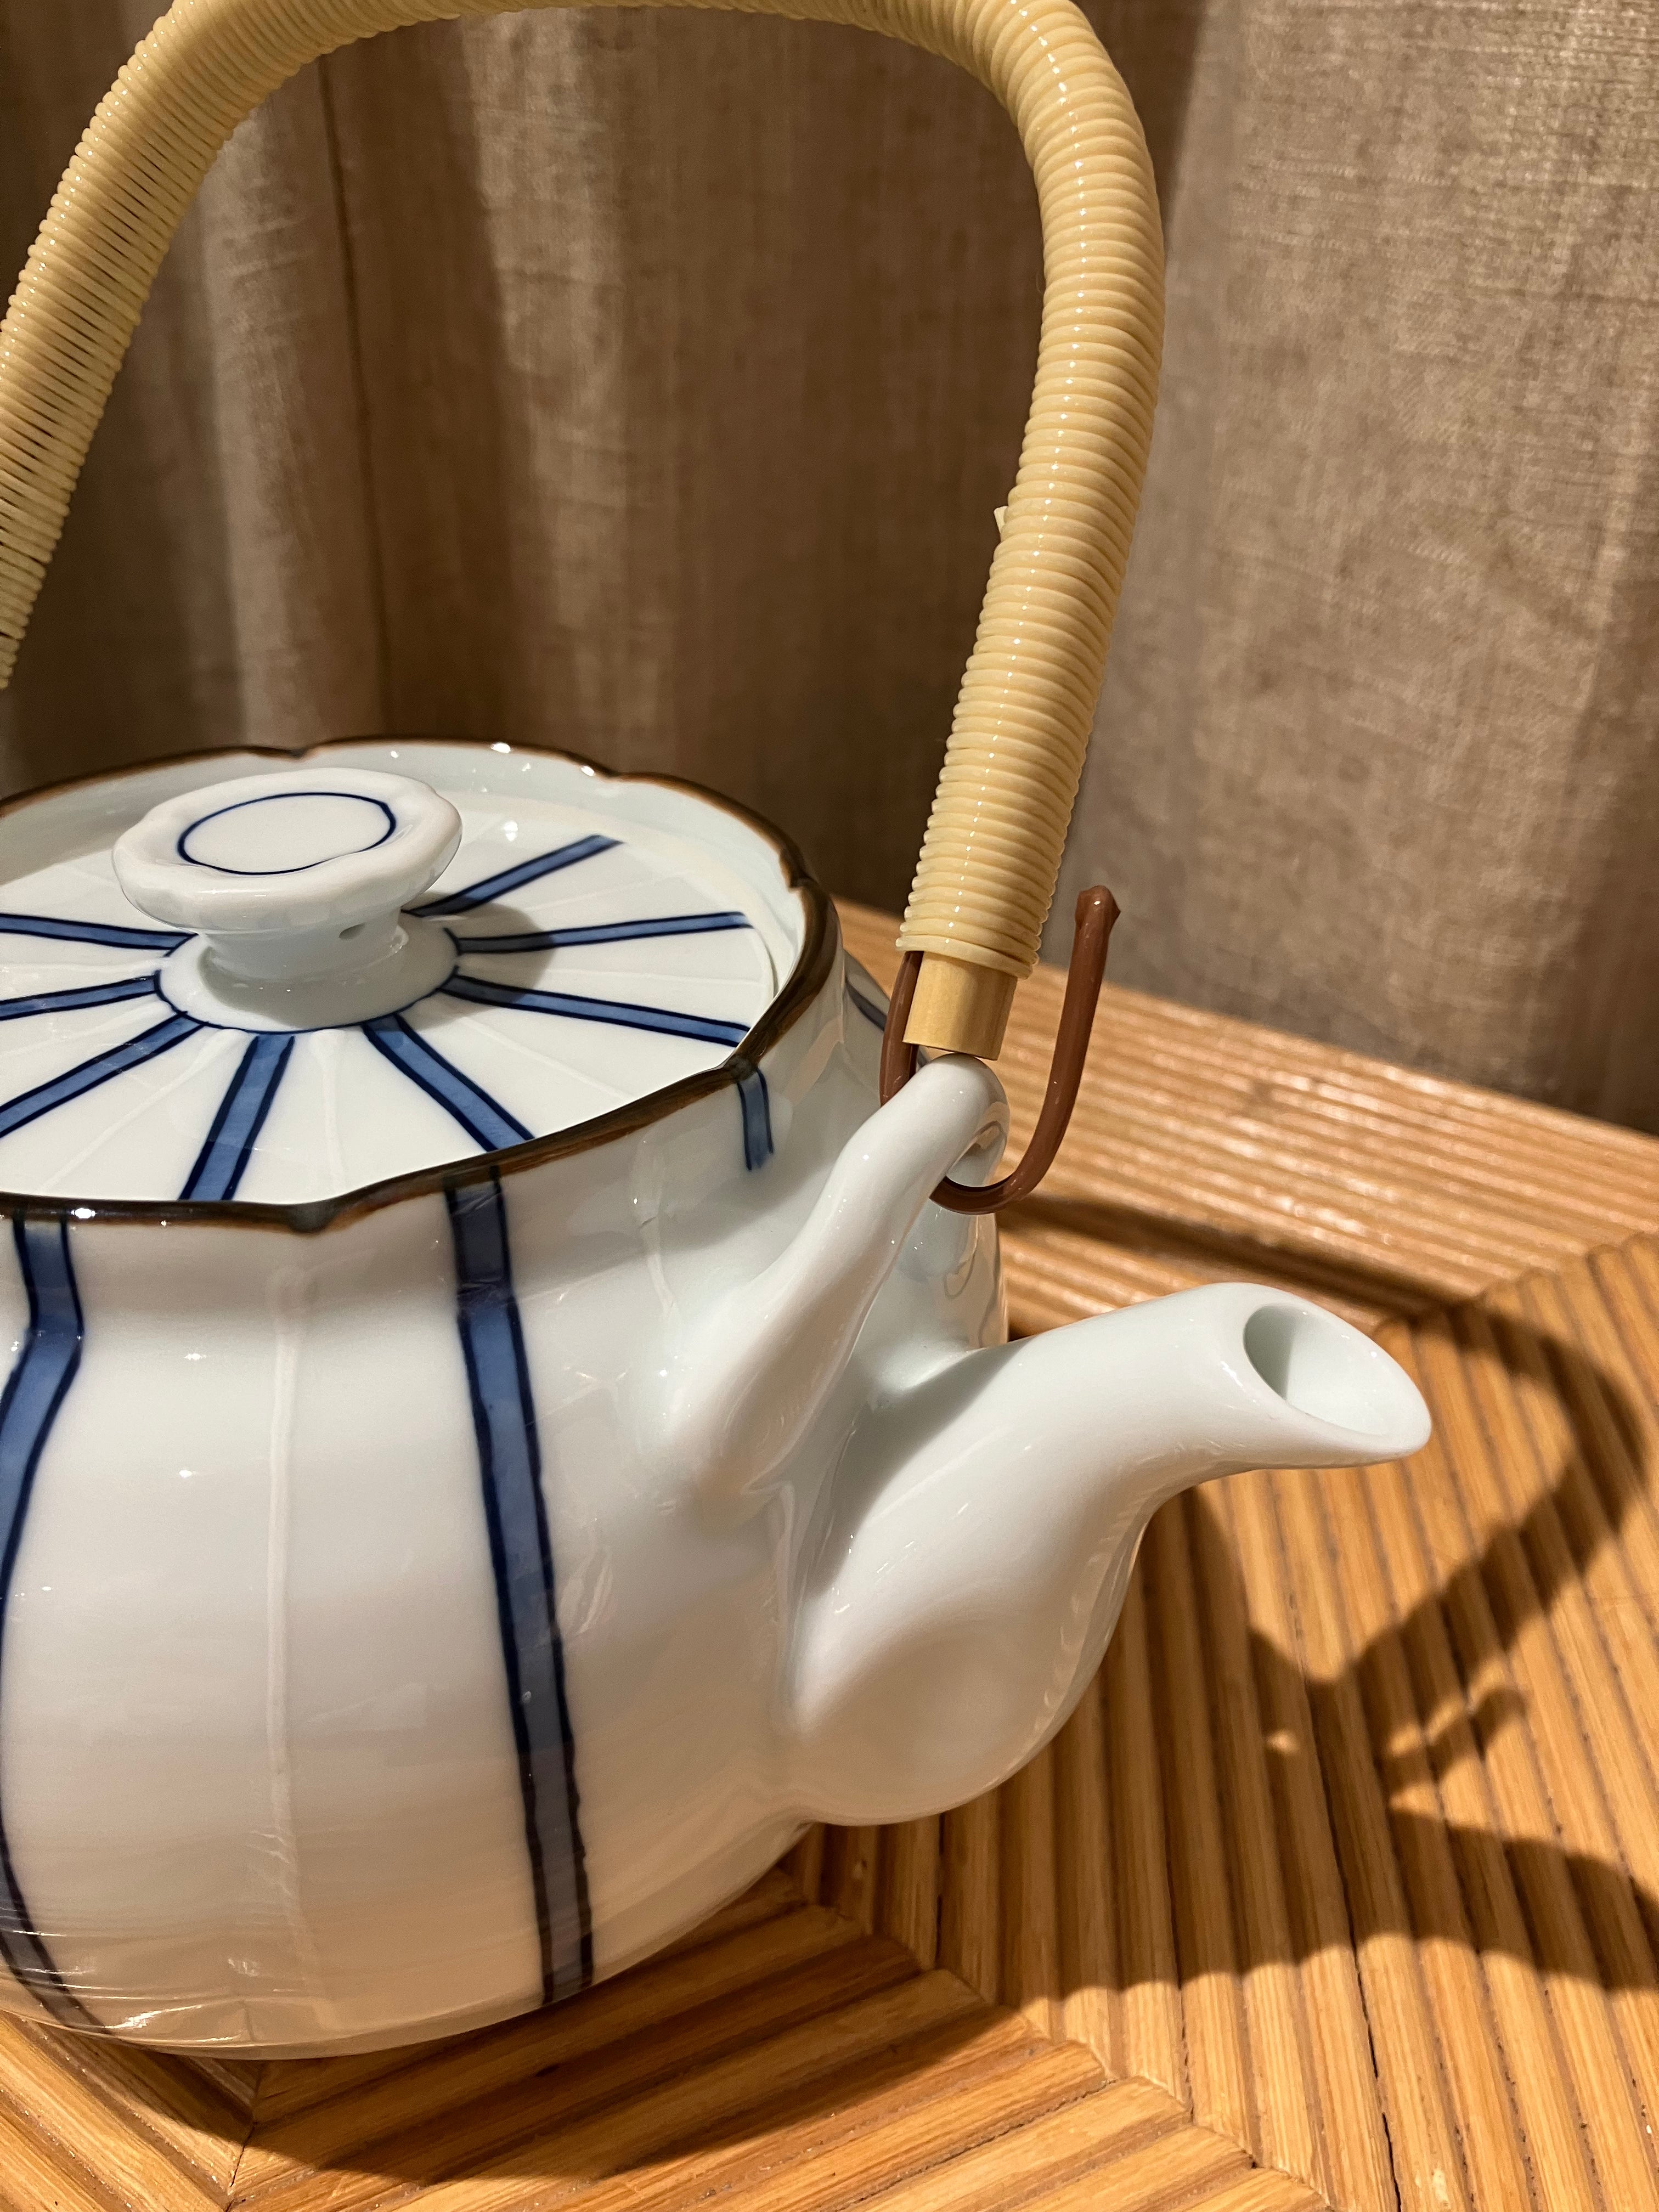 Teapot with blue stripes and handle